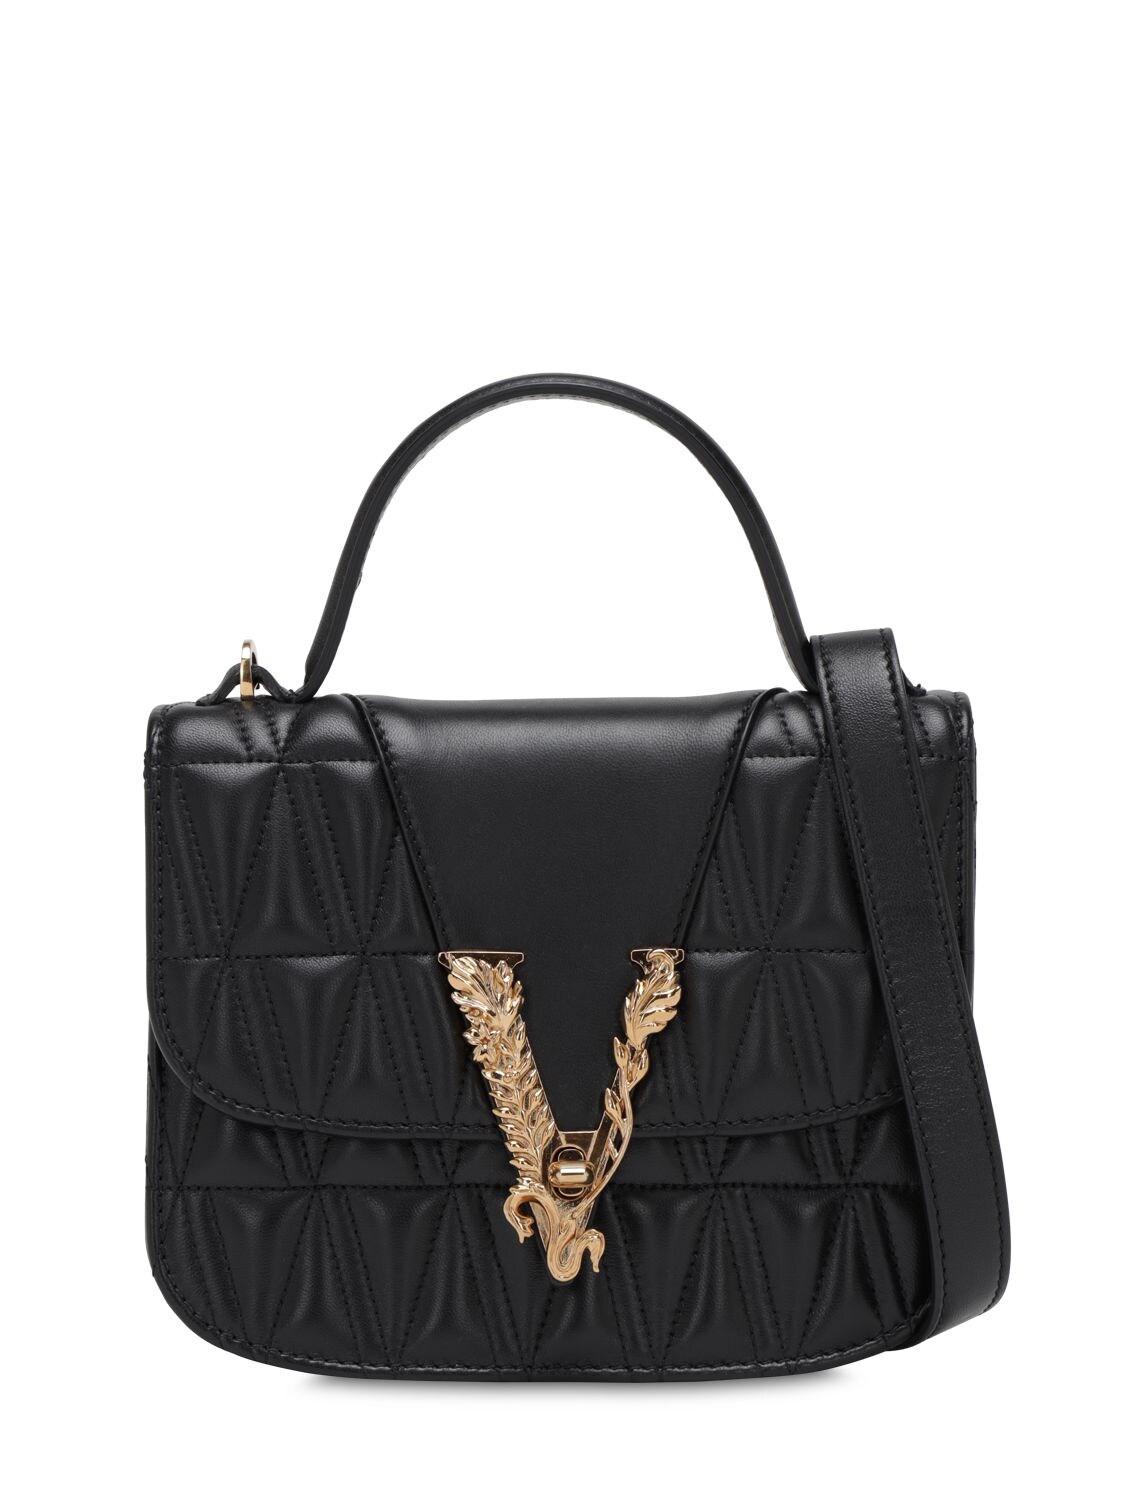 Versace Virtus Quilted Leather Top Handle Bag in Black